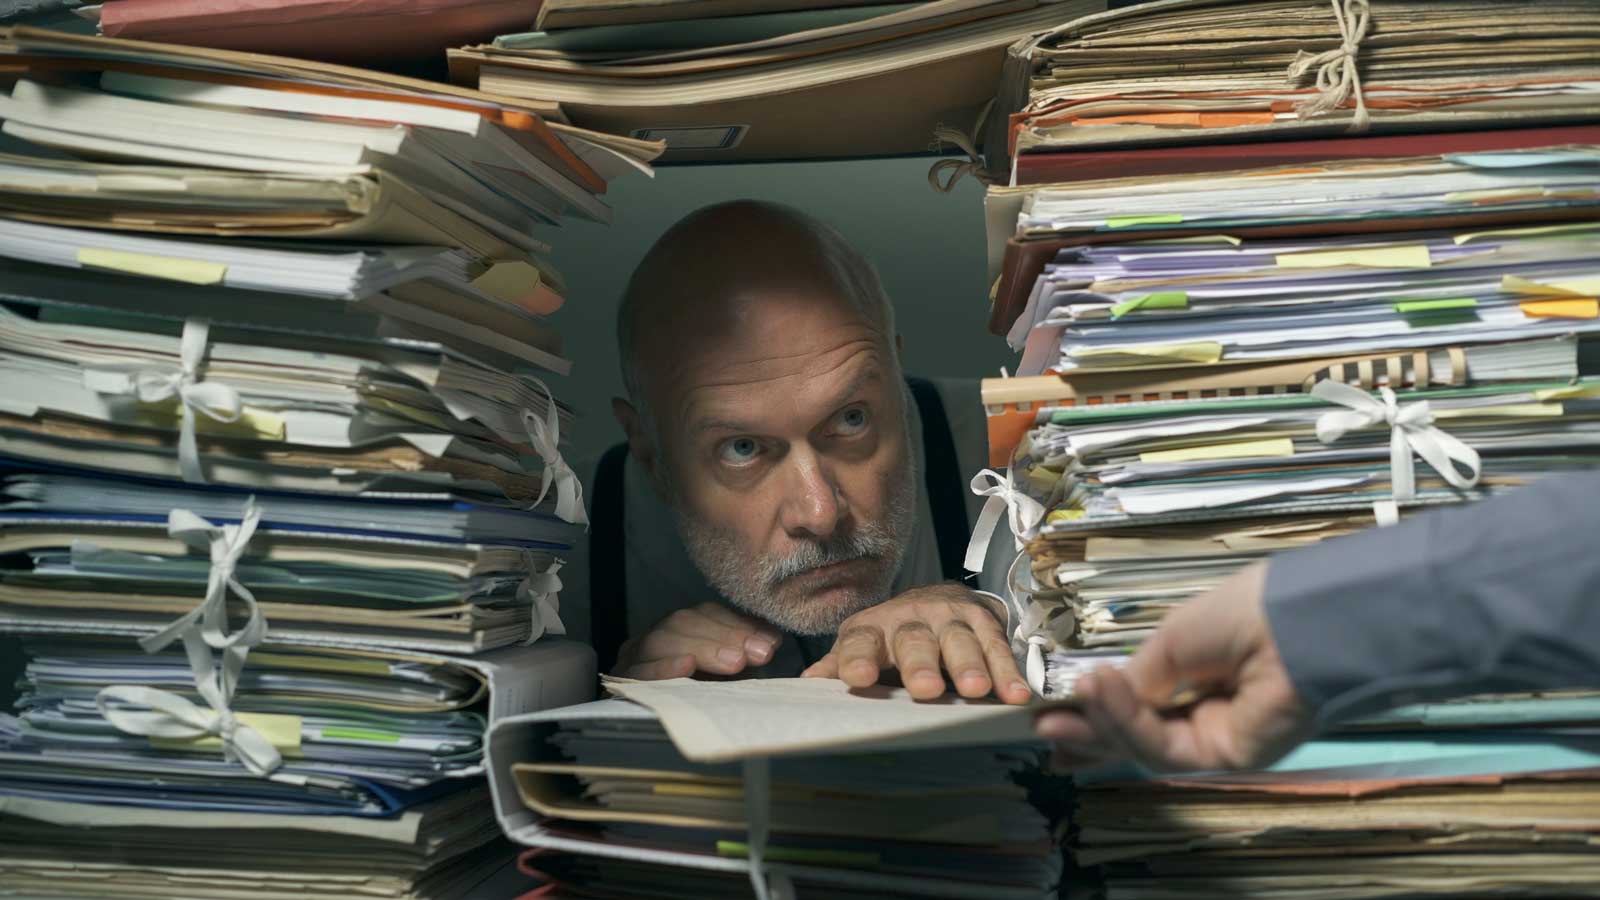 The old man hides in his fort made of paperwork and accepts more paperwork from someone through a window like a troll accepting a bridge toll.